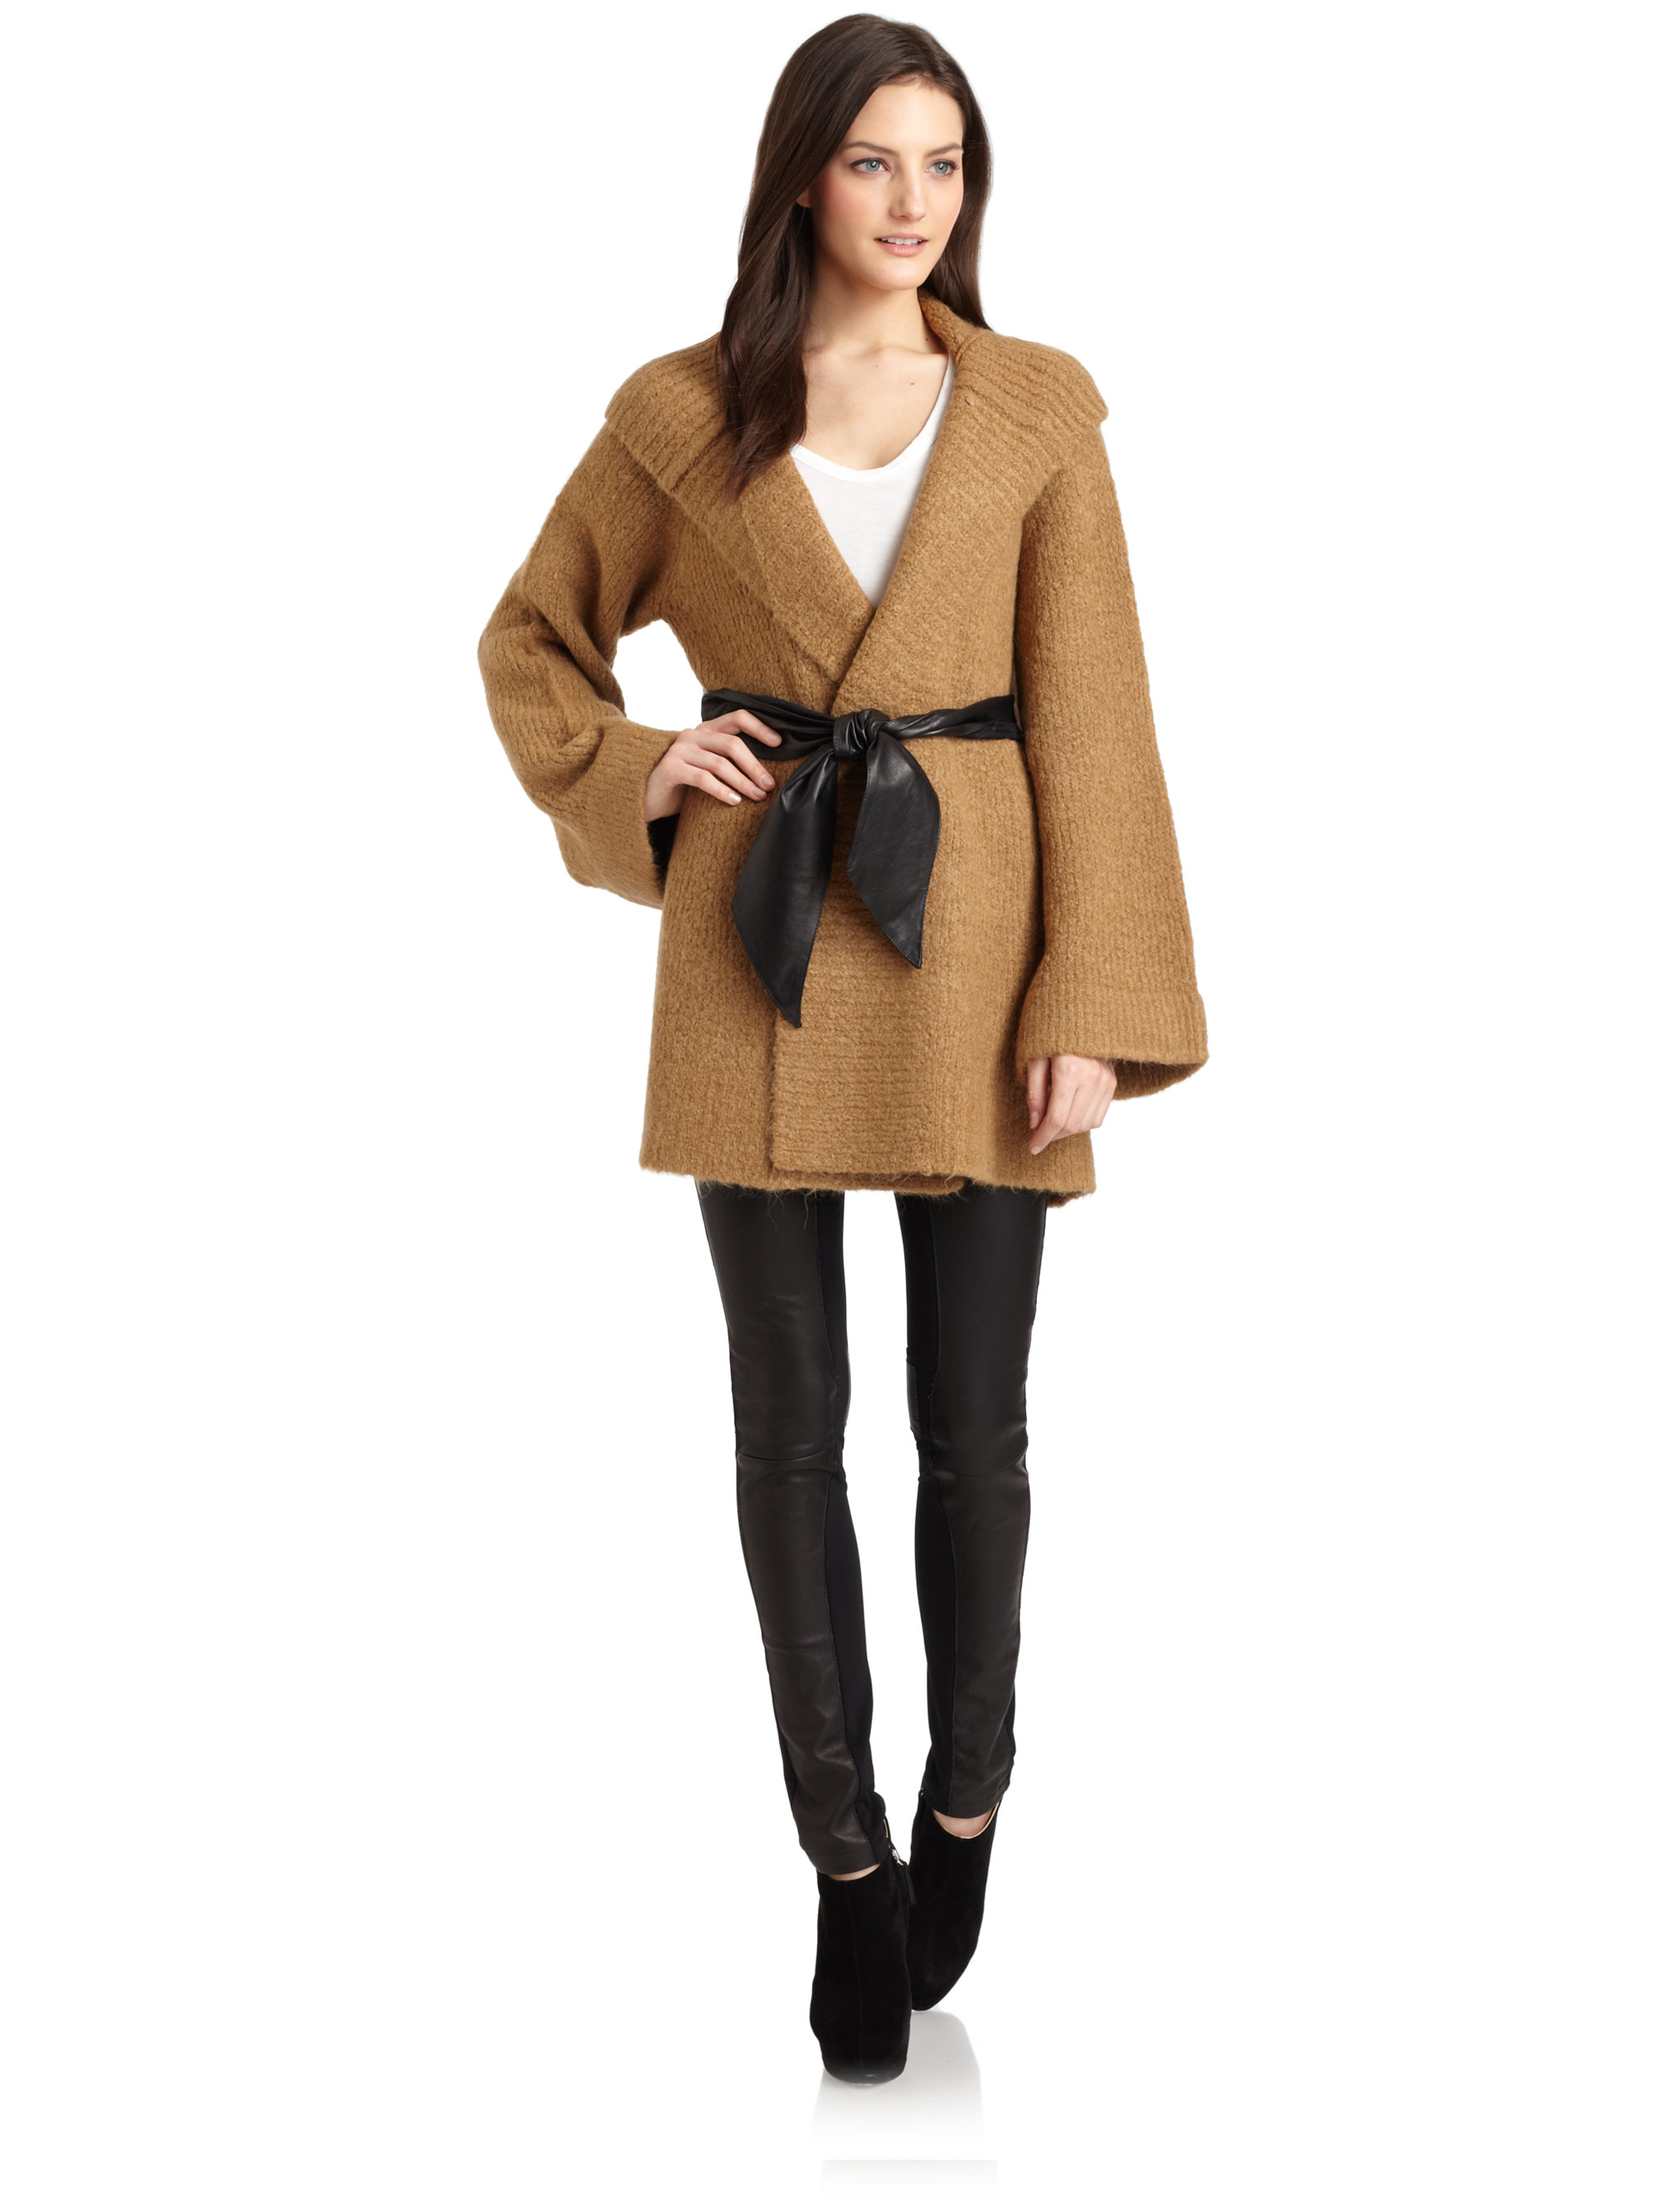 Elizabeth and james Hooded Wrap Cardigan Sweater in Brown | Lyst